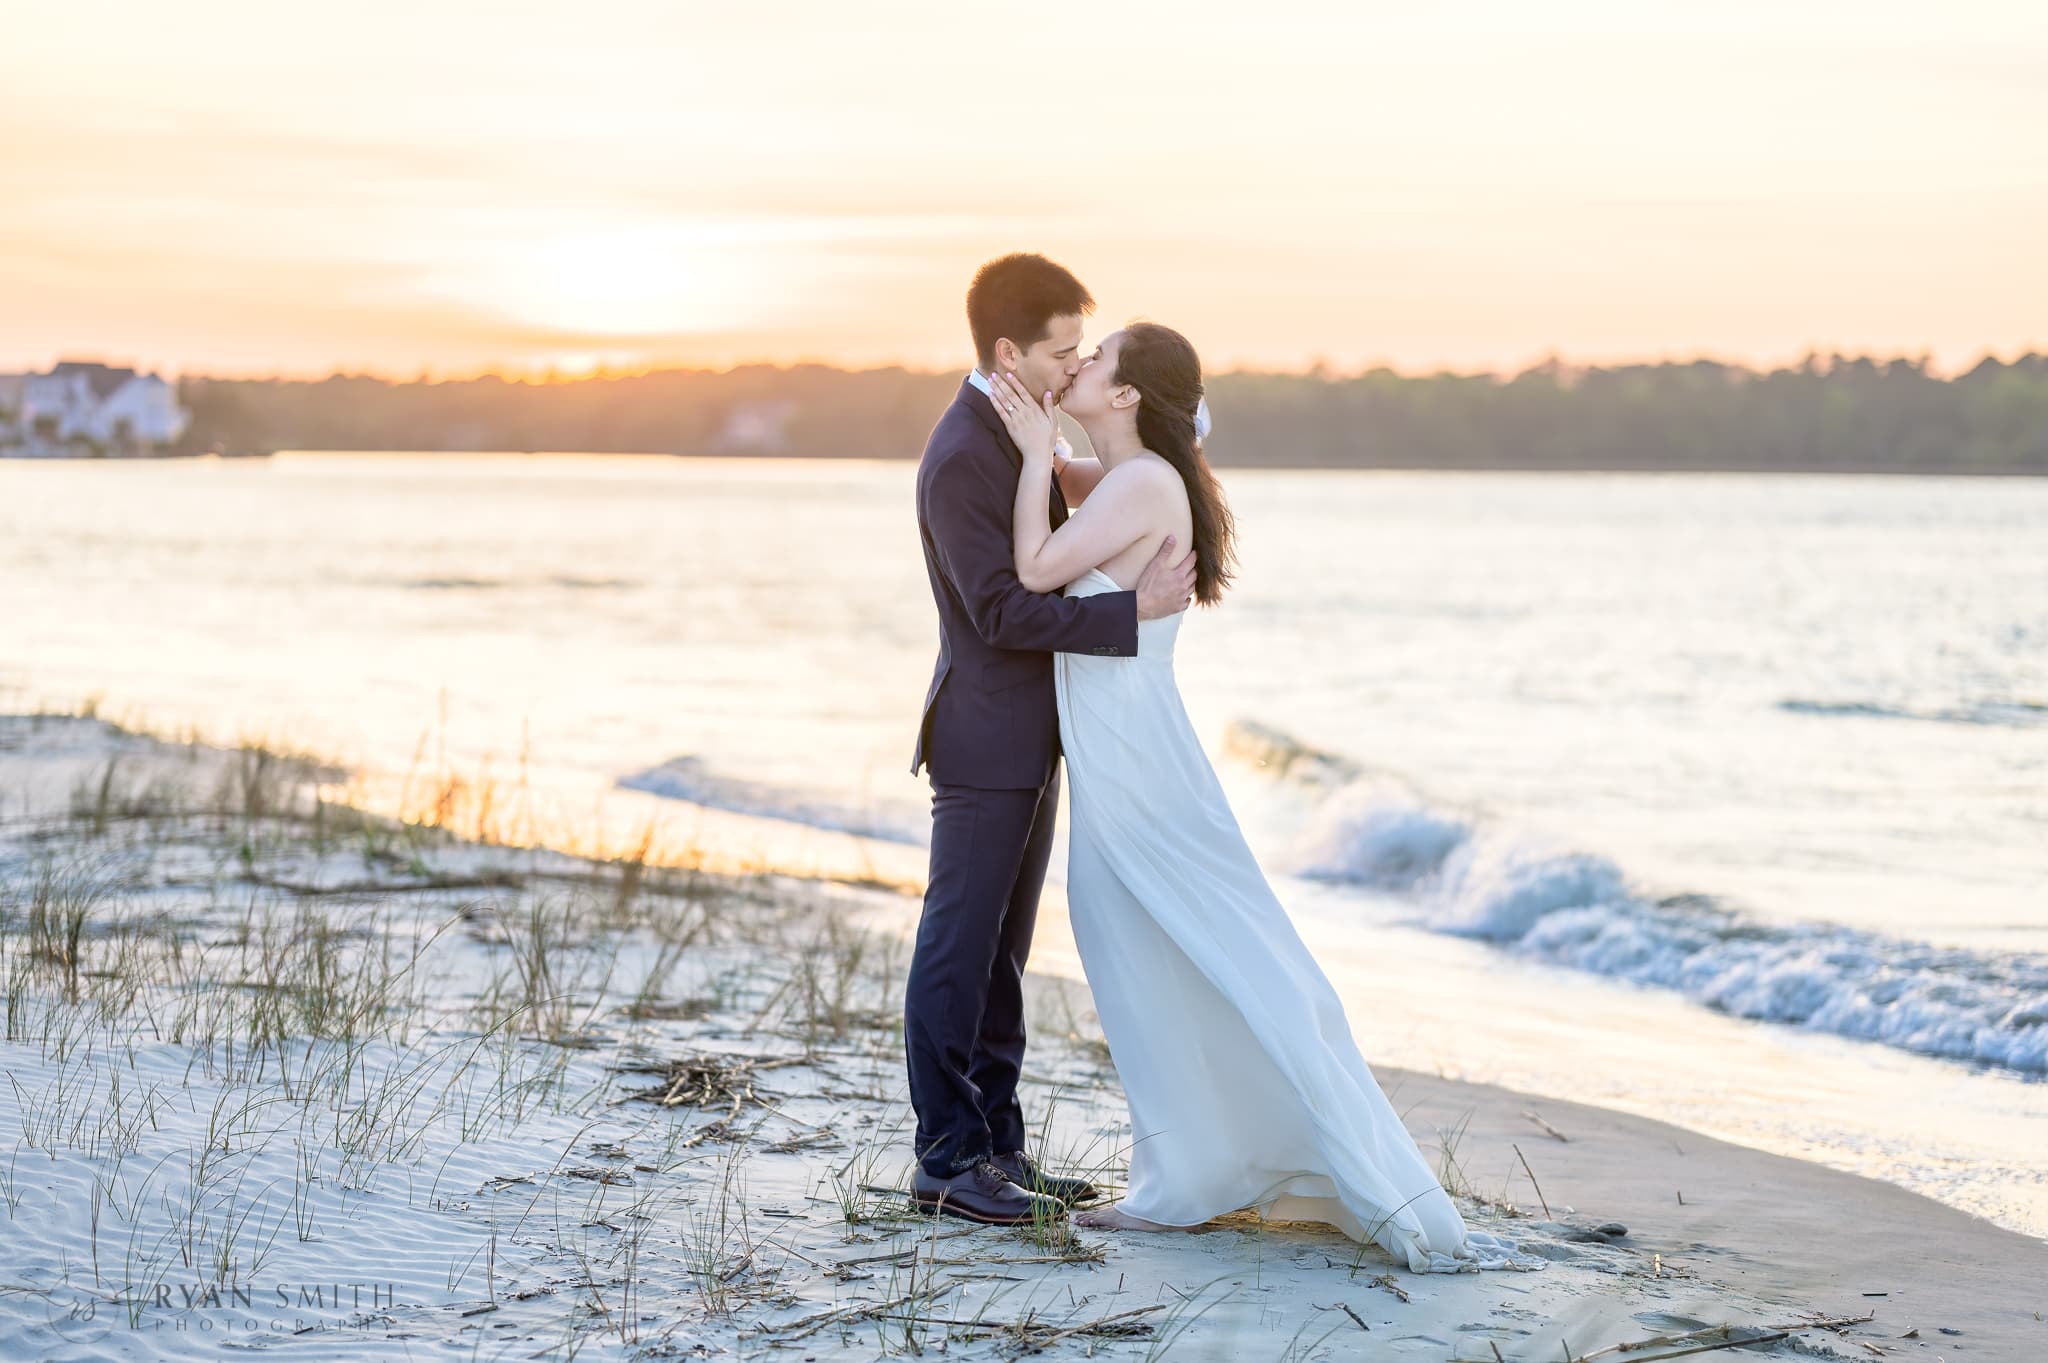 Kiss by the water at sunset - Cherry Grove Point - North Myrtle Beach